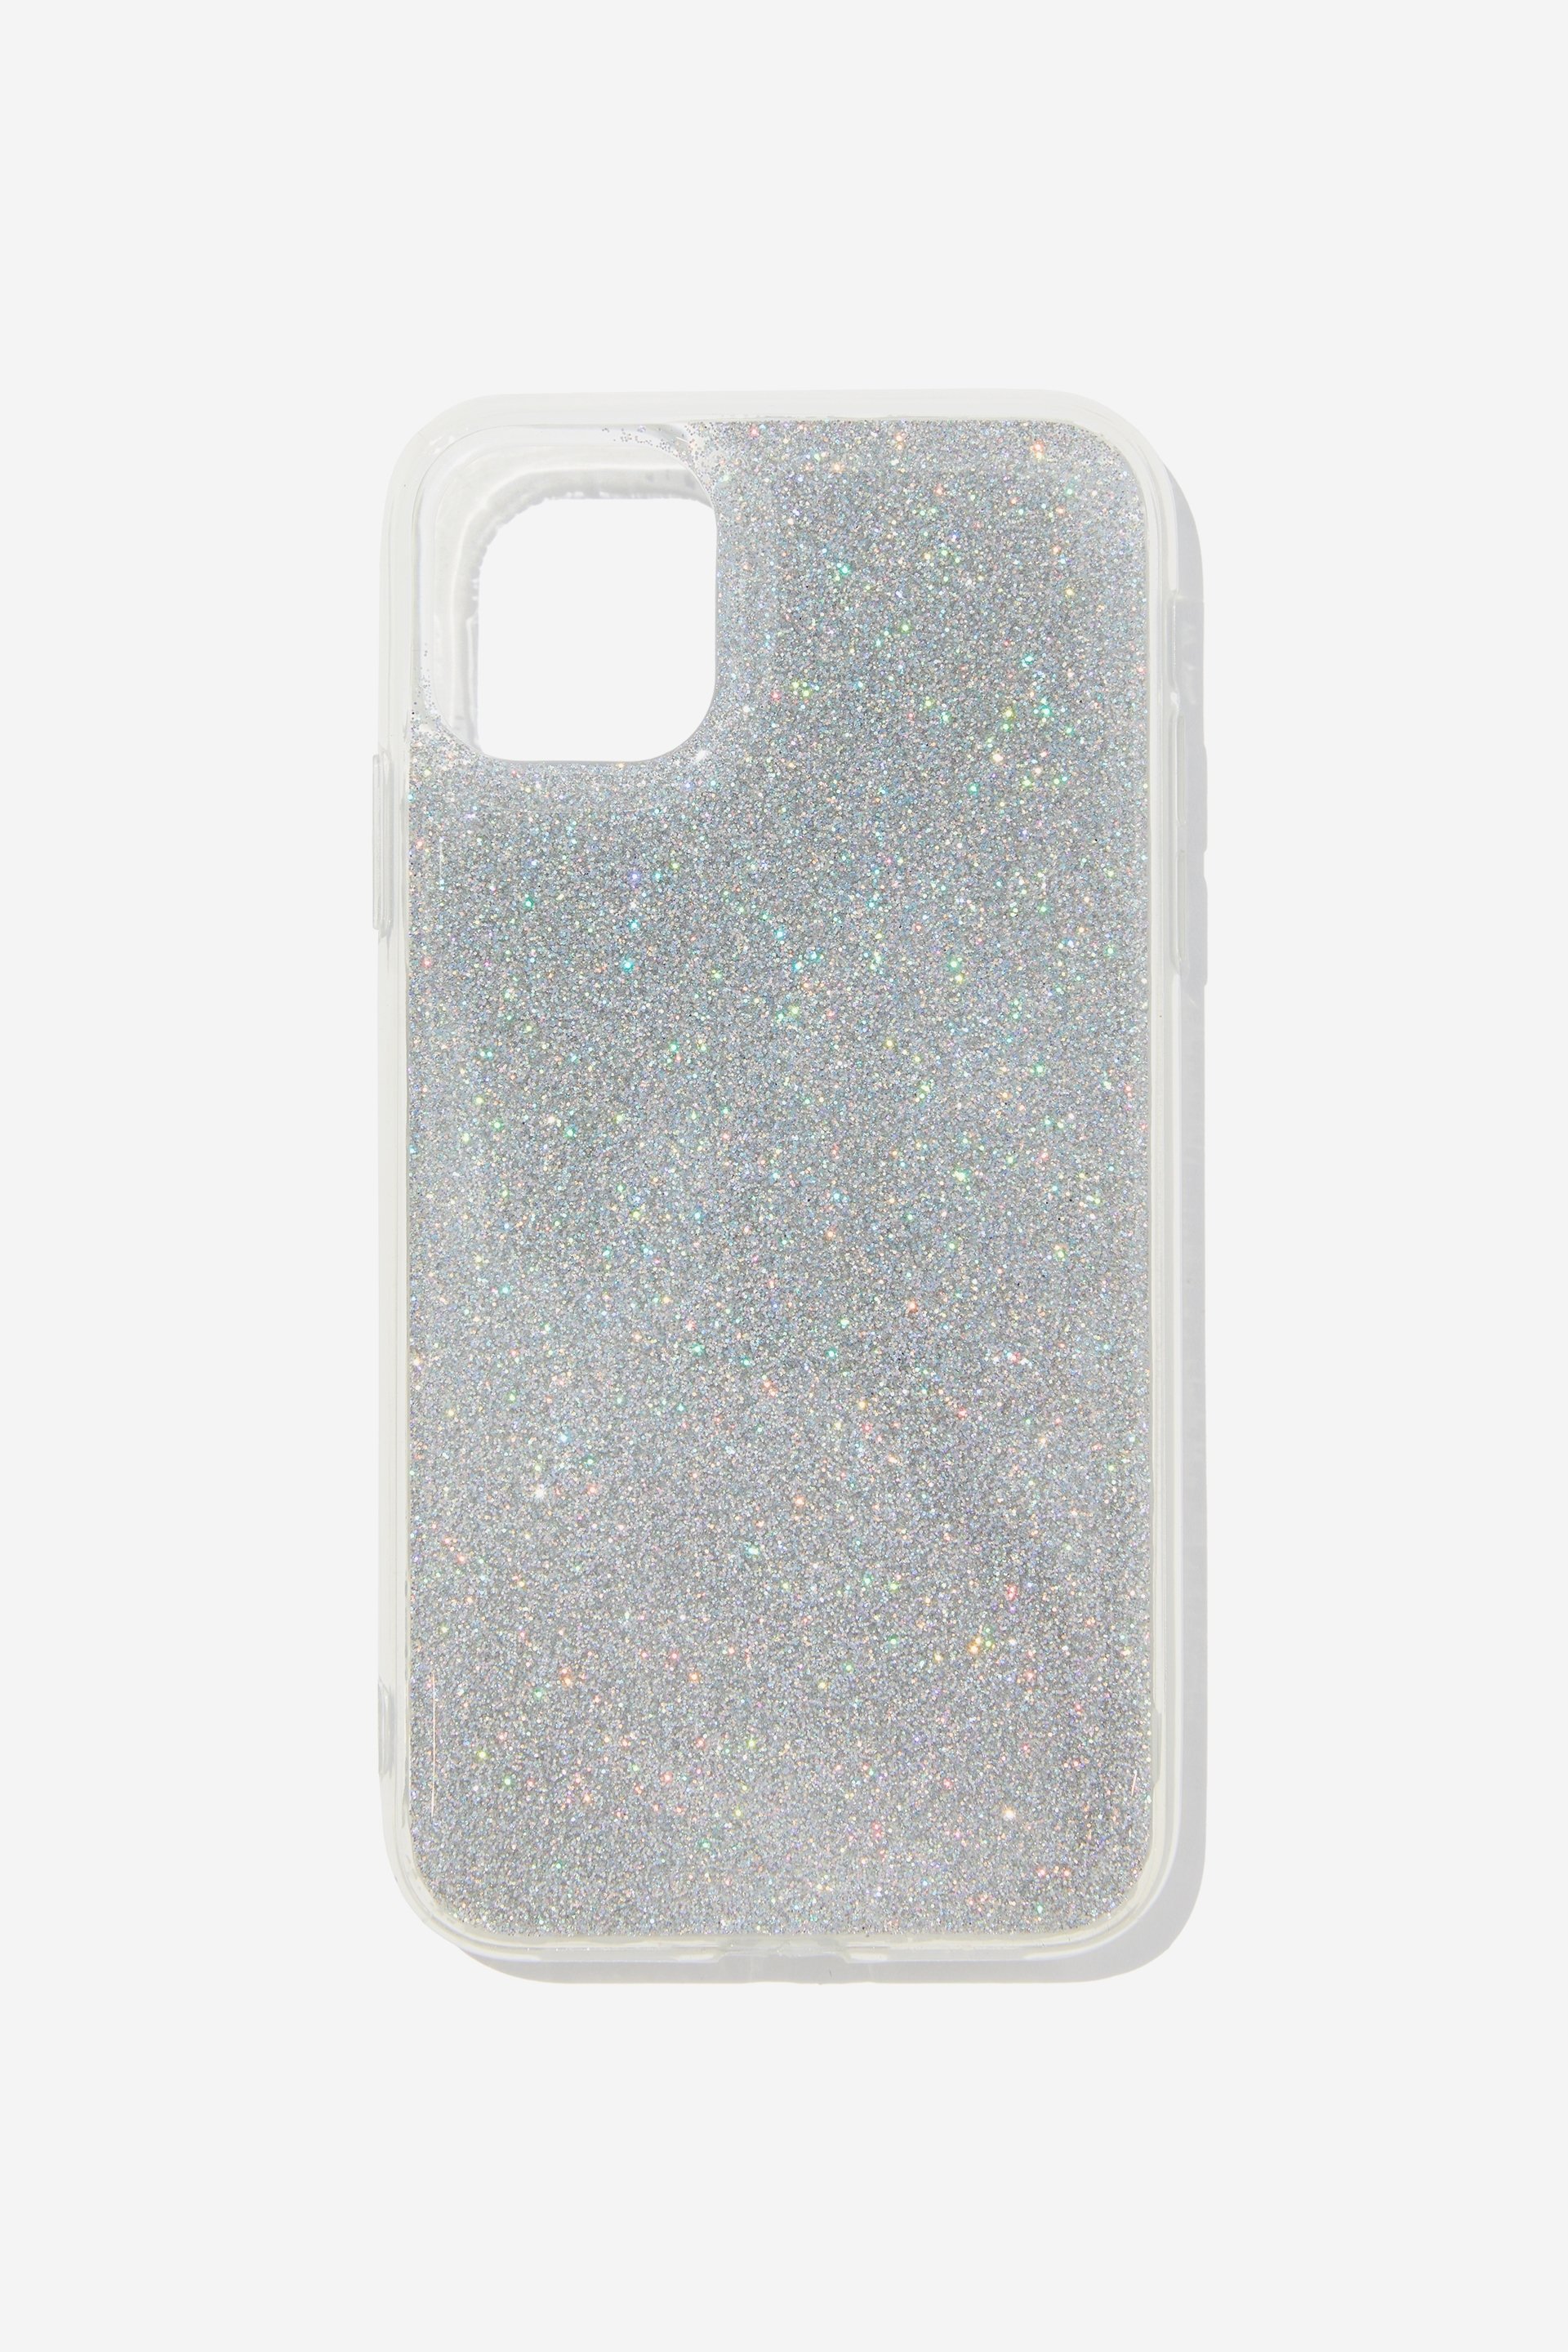 Typo - Protective Phone Case iPhone 11 - Silver glitter